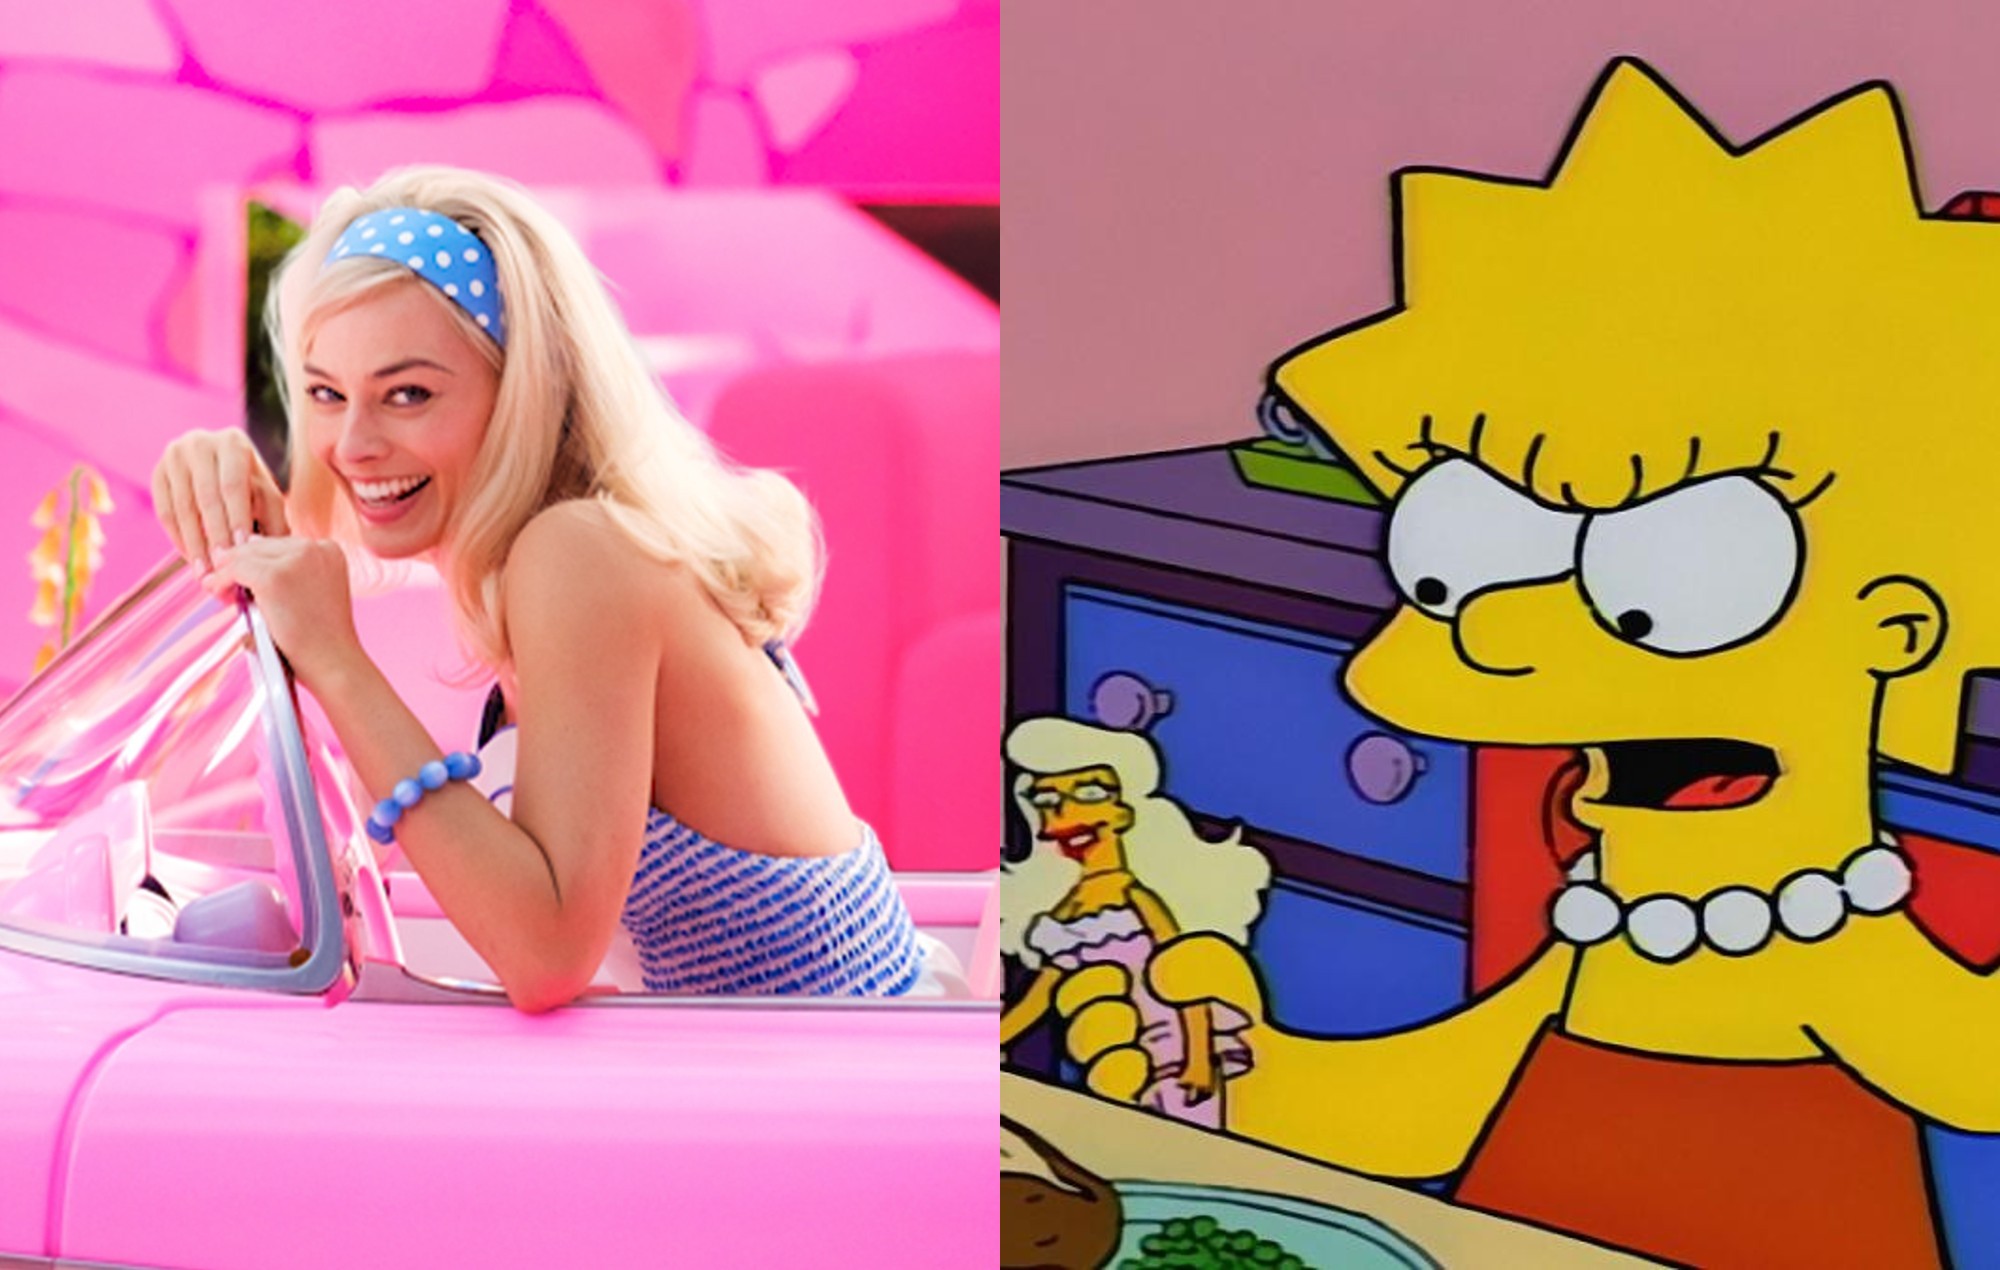 ‘Barbie’ is “modern answer” to Malibu Stacy episode, say ‘The Simpsons’ writers